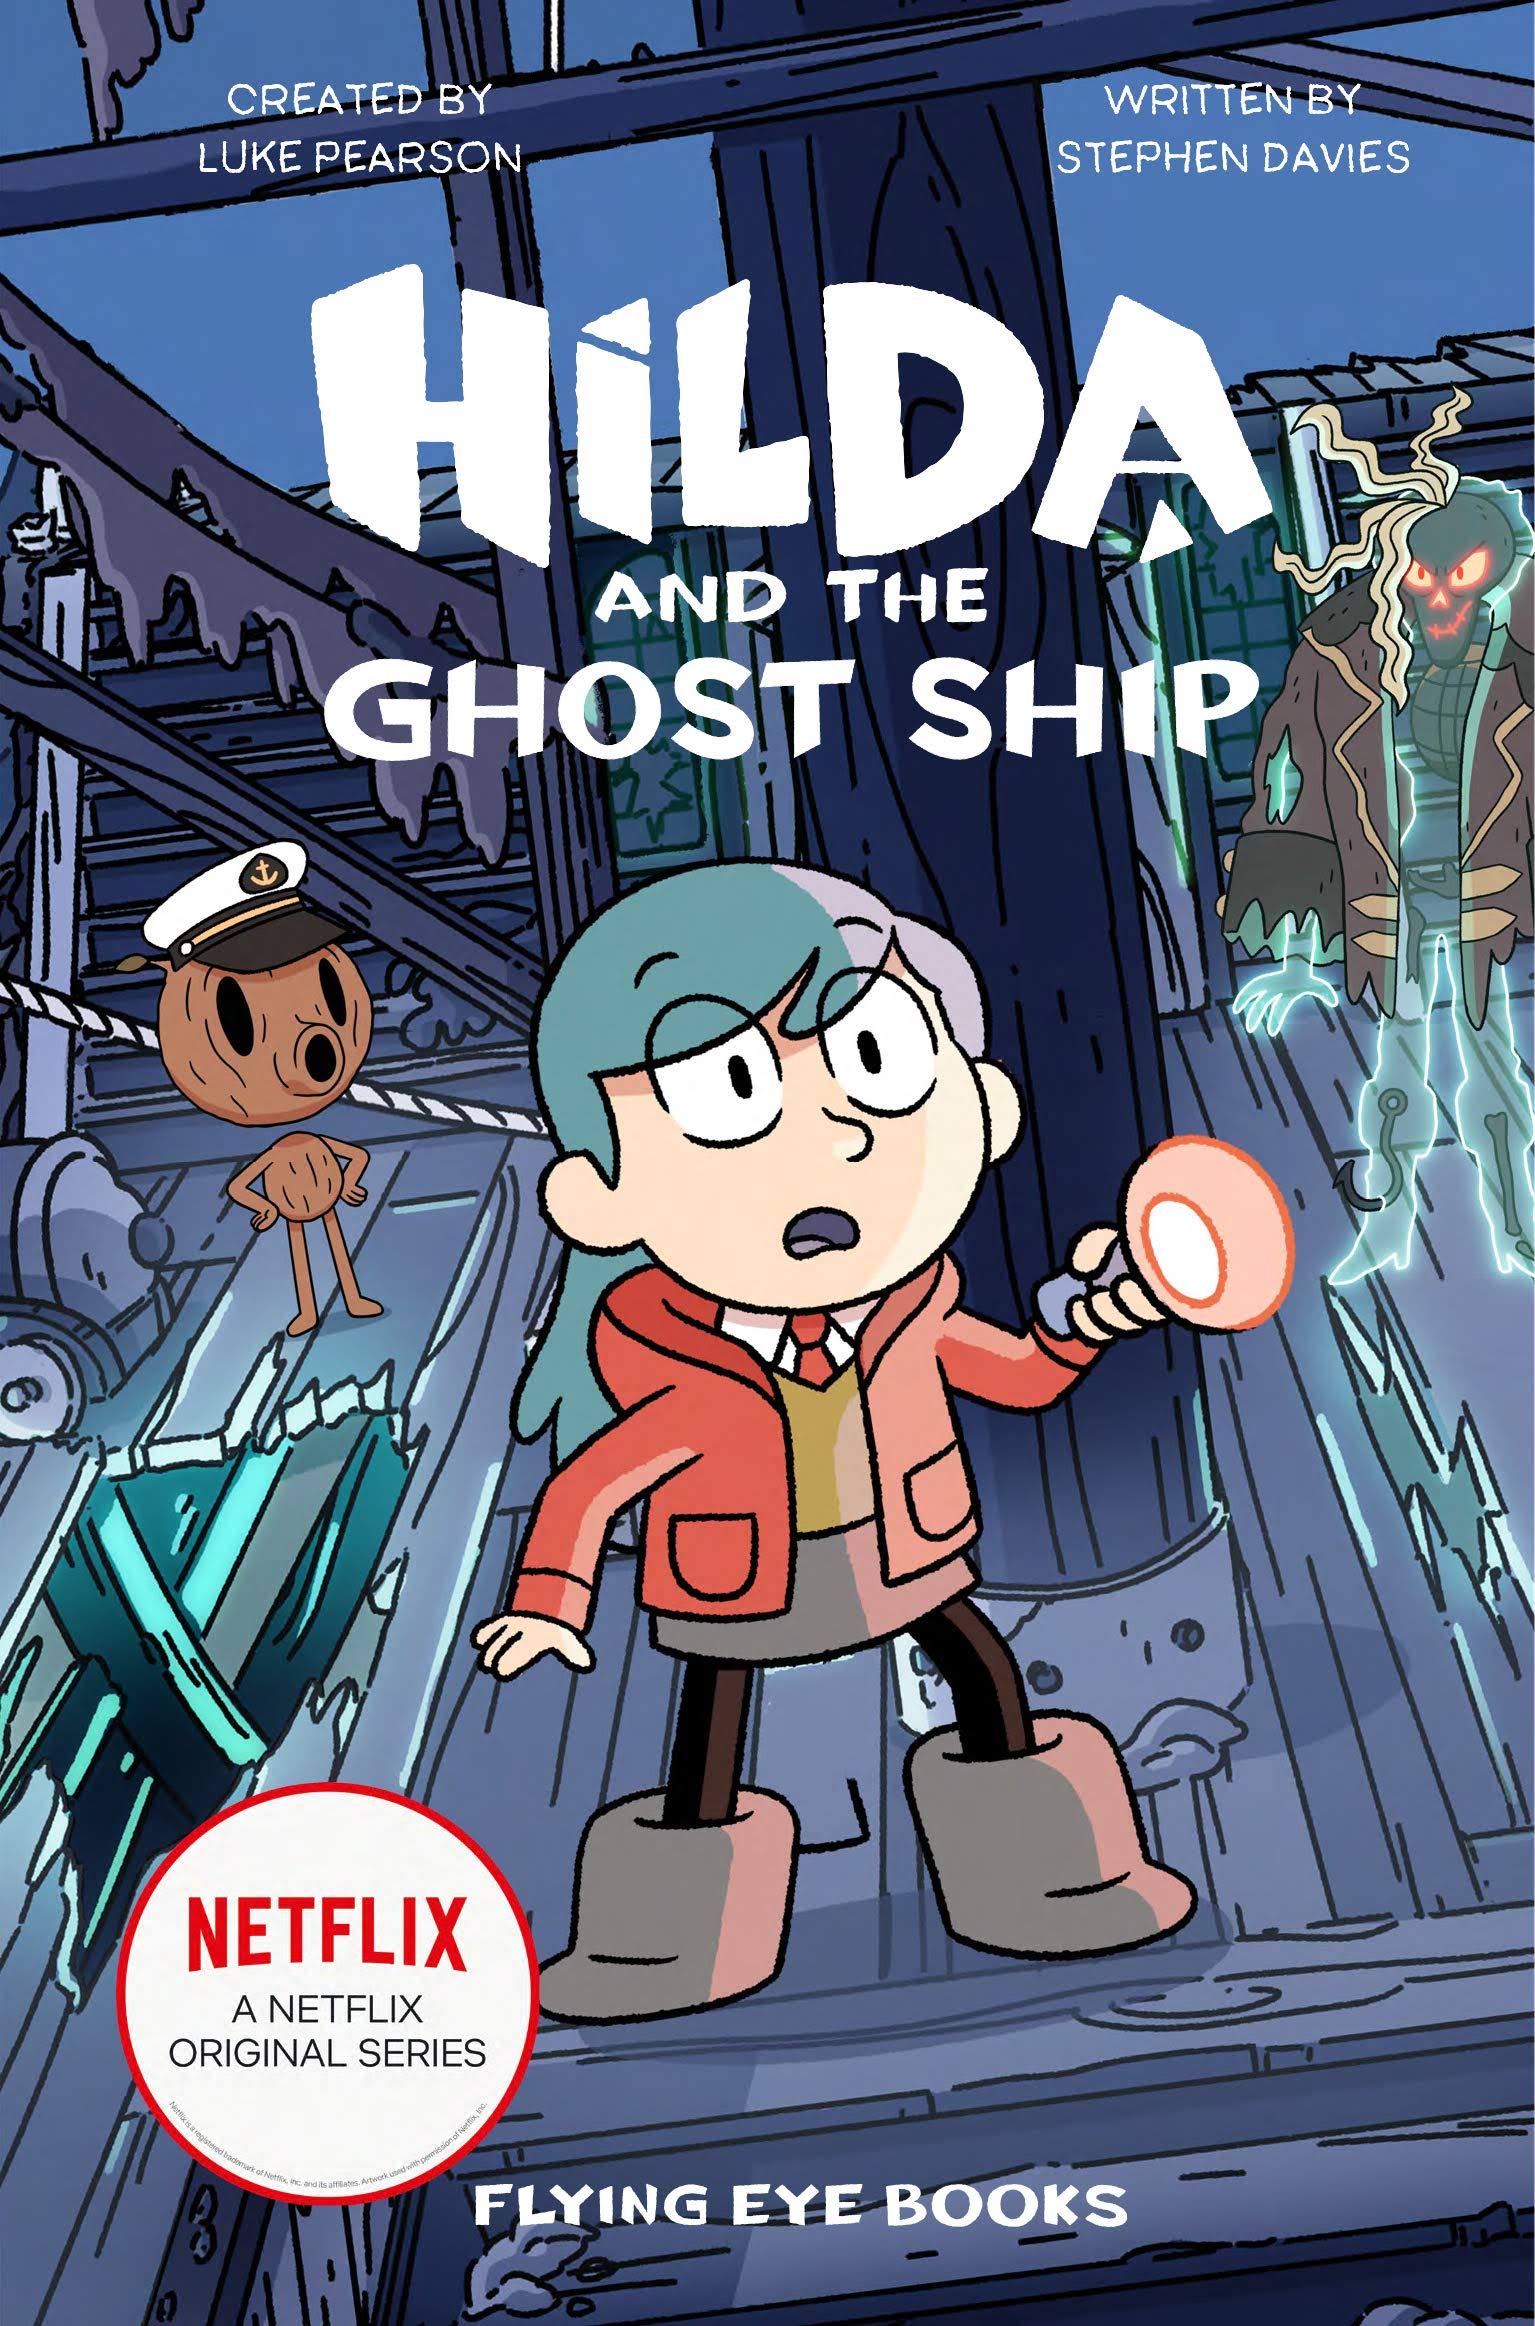 Hilda and The Ghost Ship by Stephen Davies